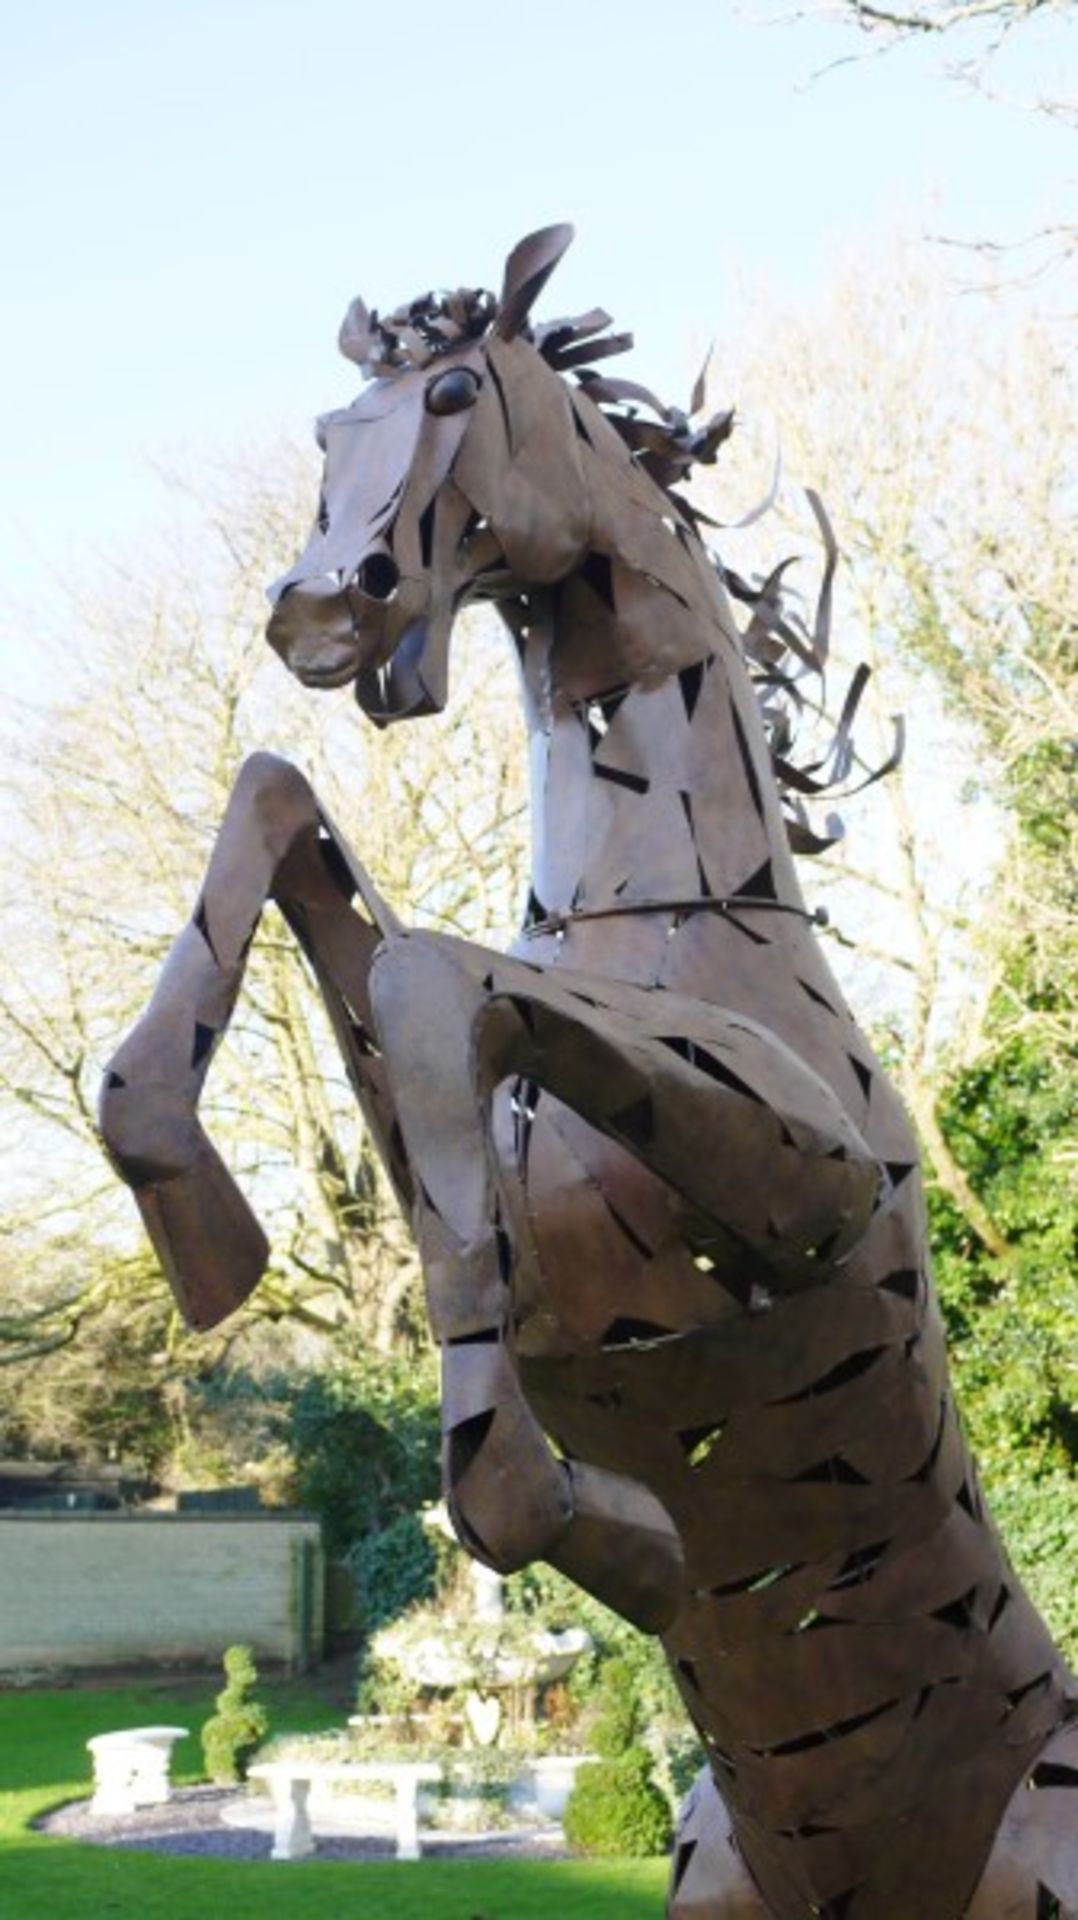 VERY RARE METAL REARING HORSE STATUE - 11 FEET HIGH ! - Image 3 of 6